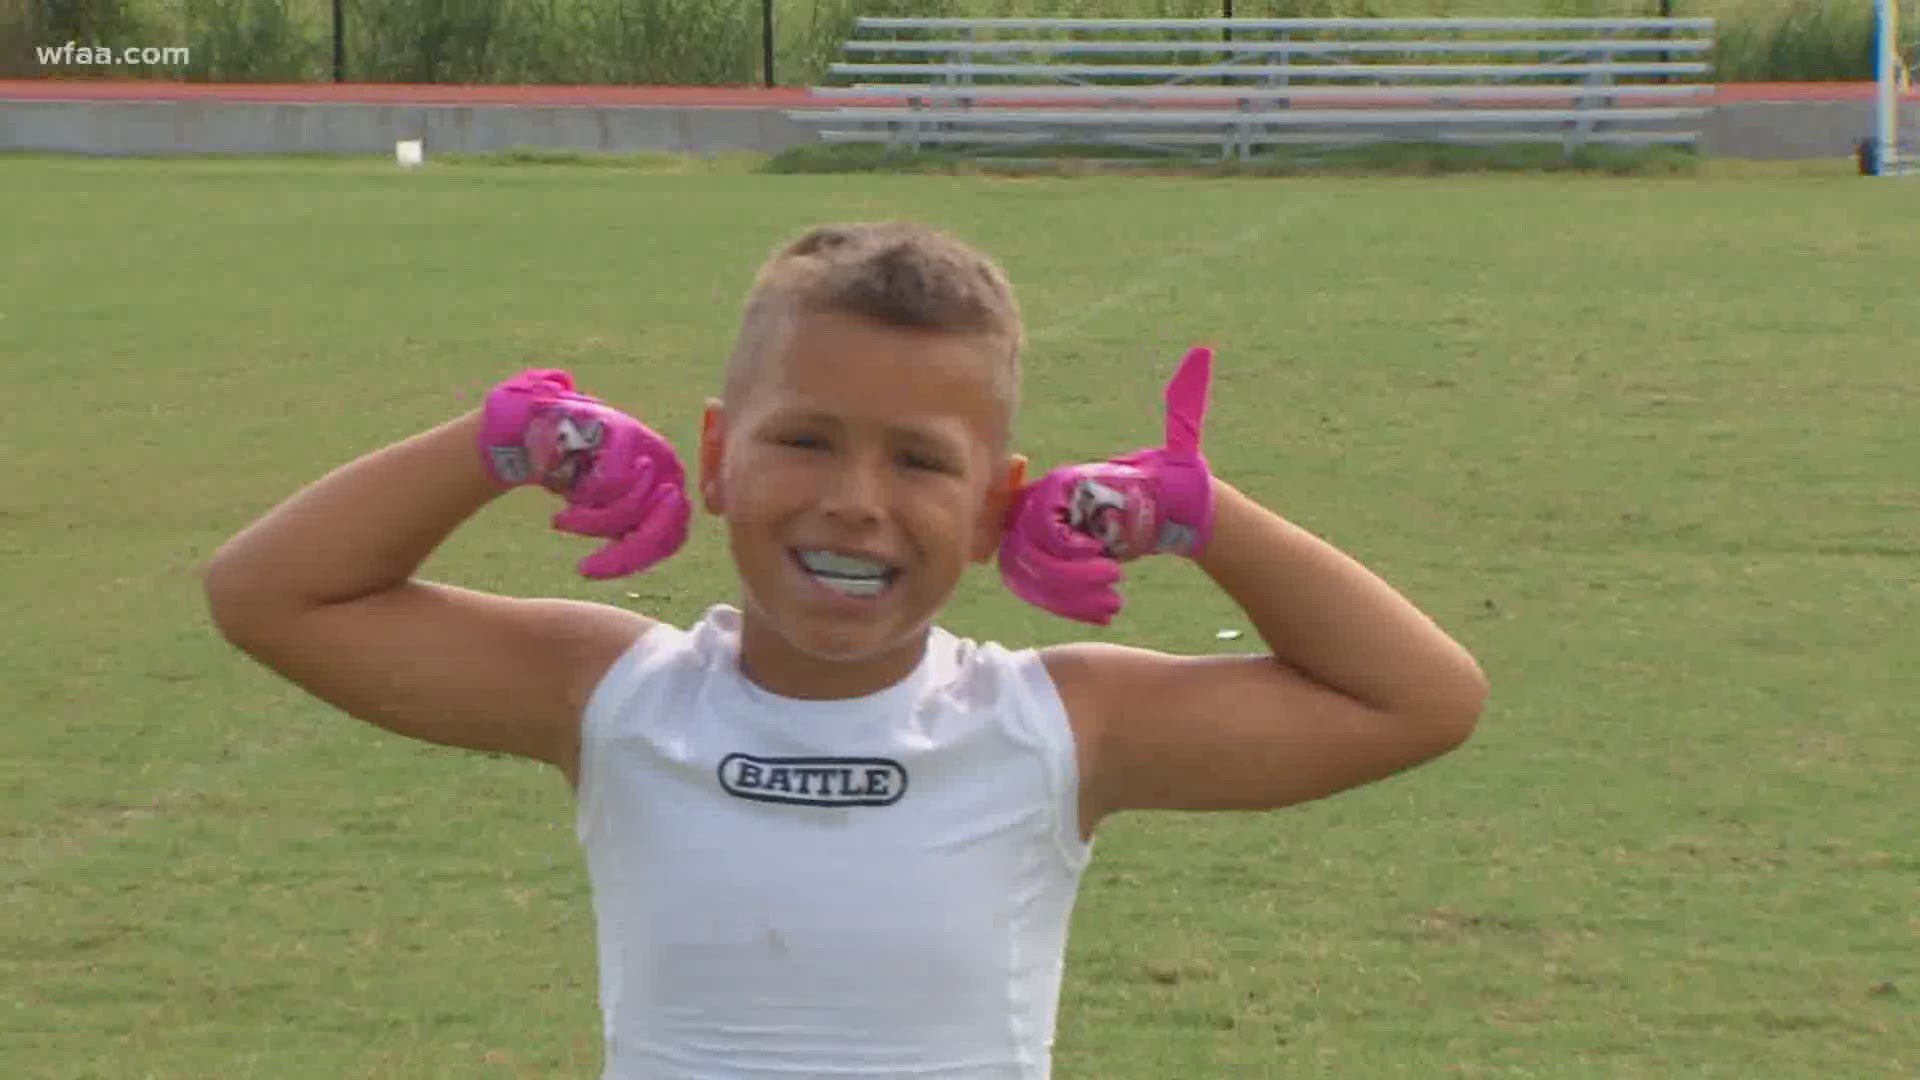 Baby Gronk is a superstar': 7-year-old football celebrity tops